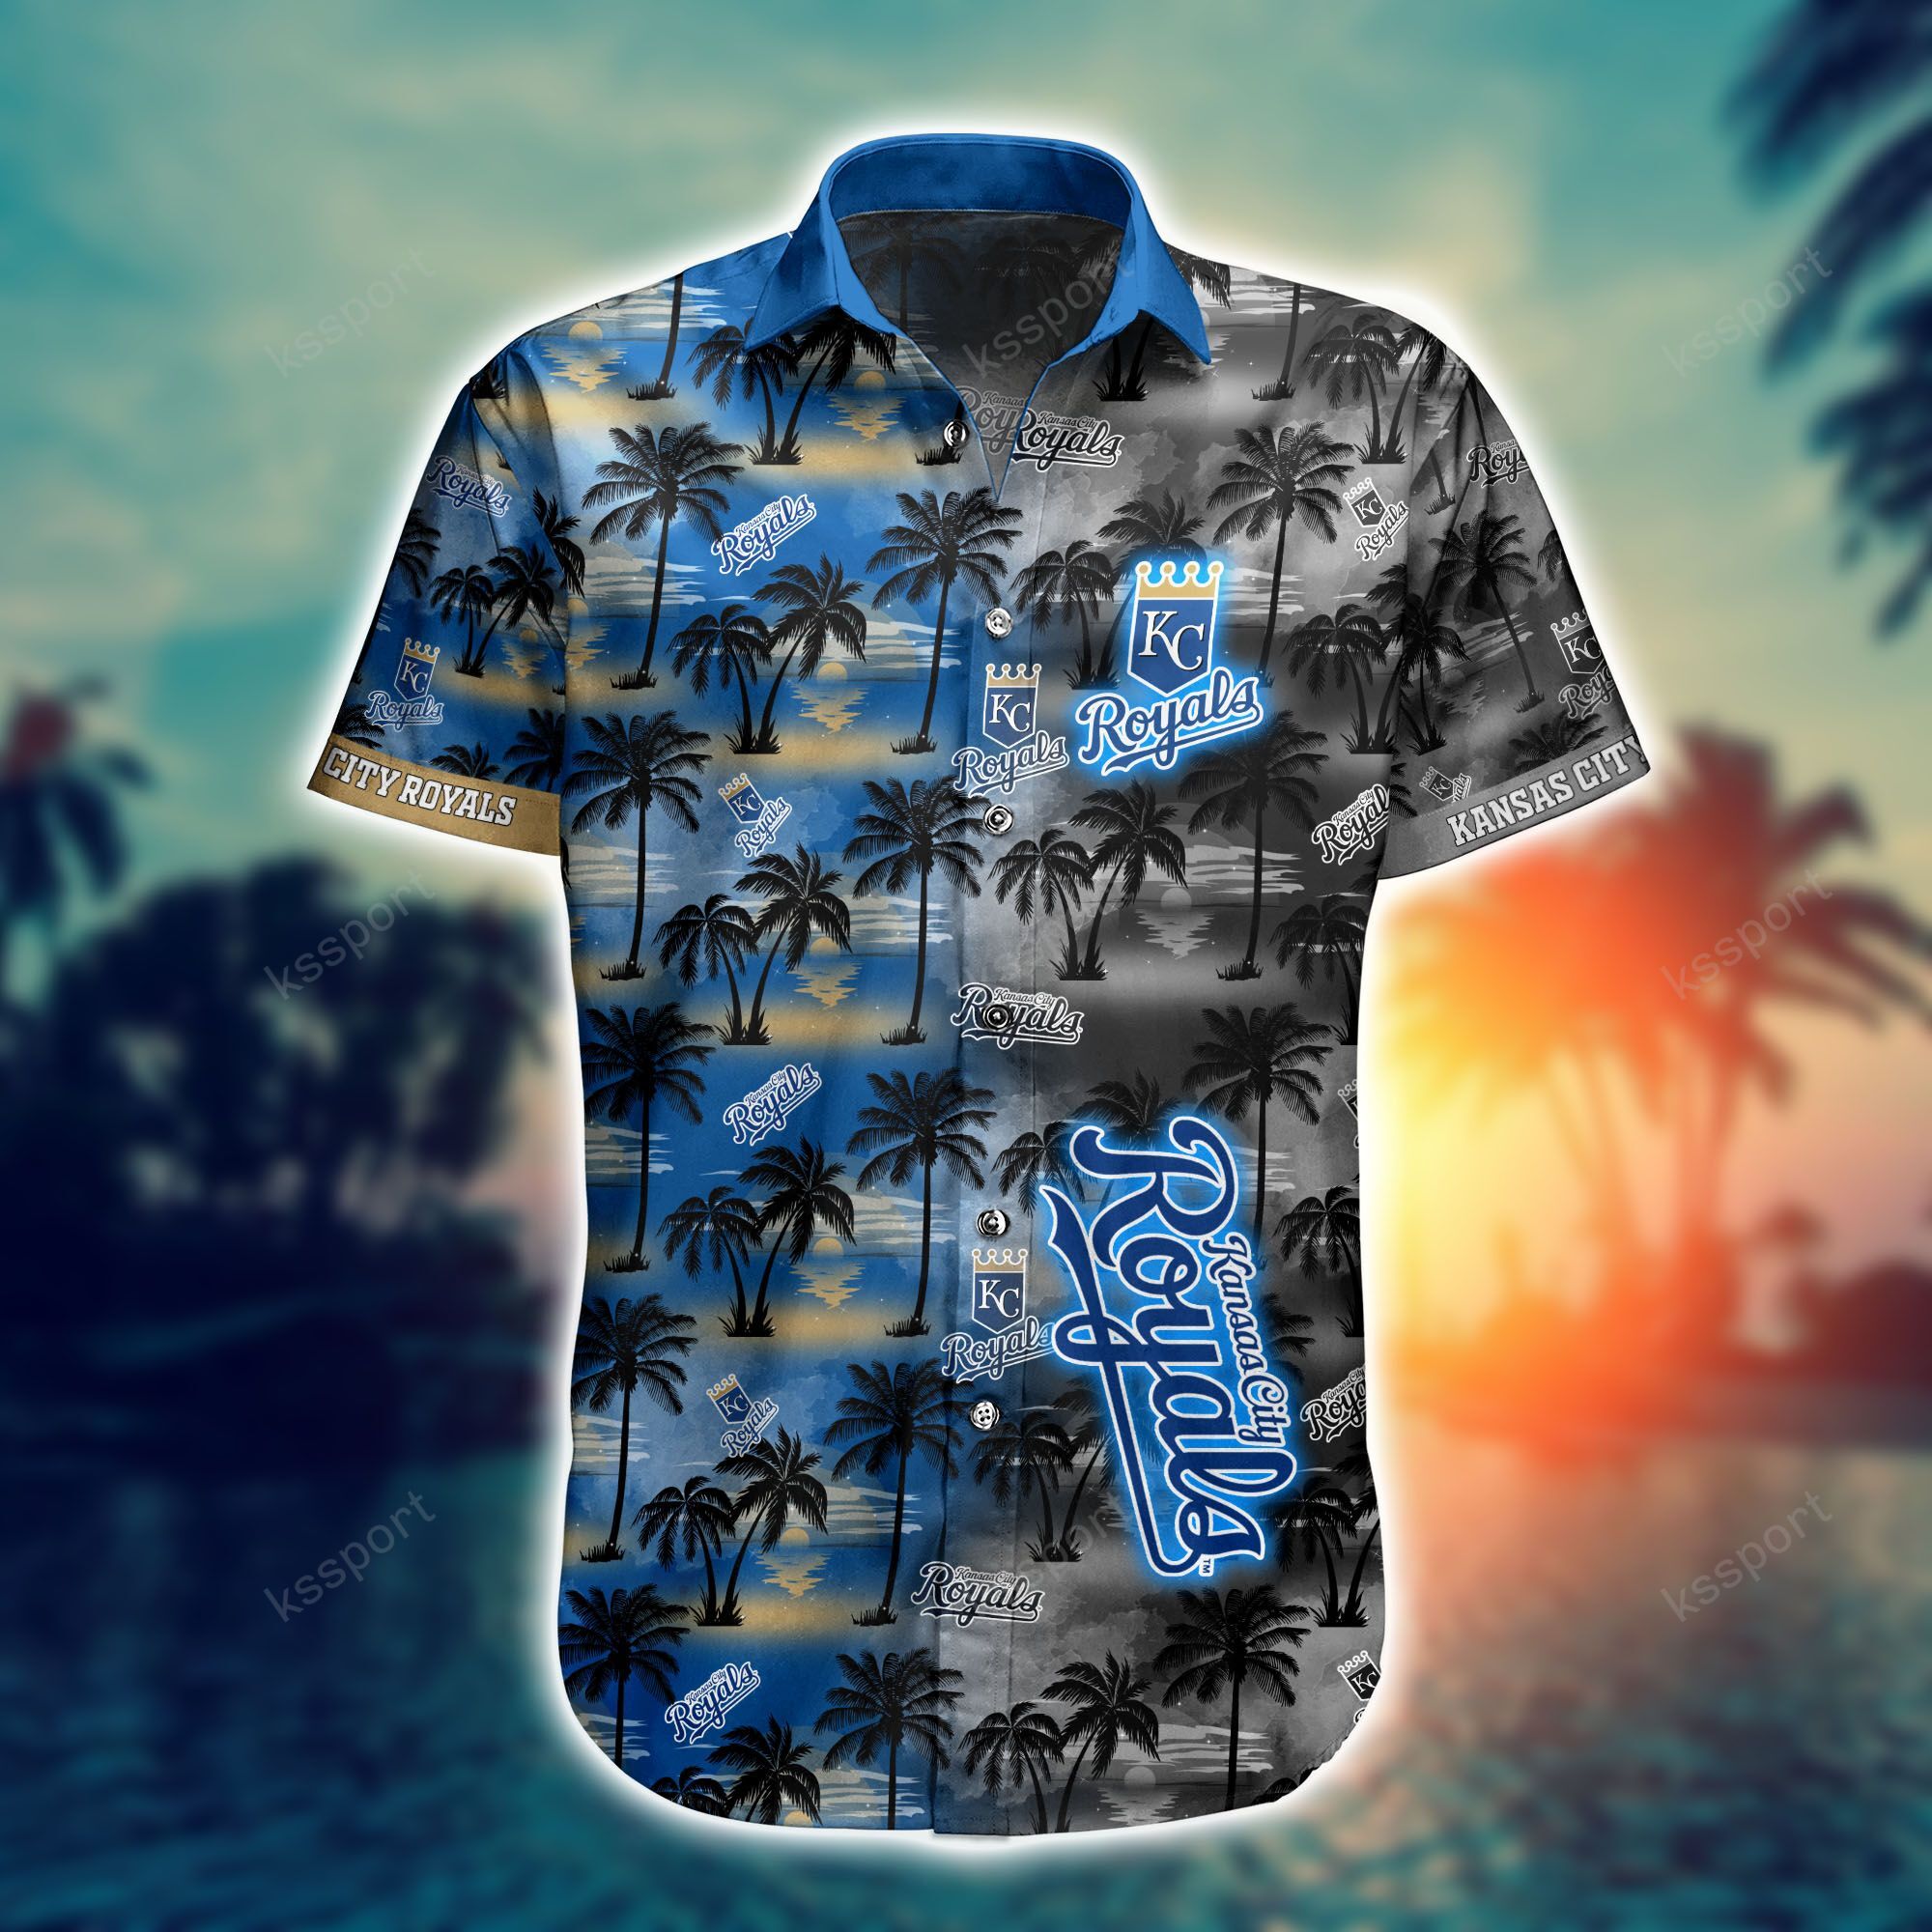 Top cool Hawaiian shirt 2022 - Make sure you get yours today before they run out! 229